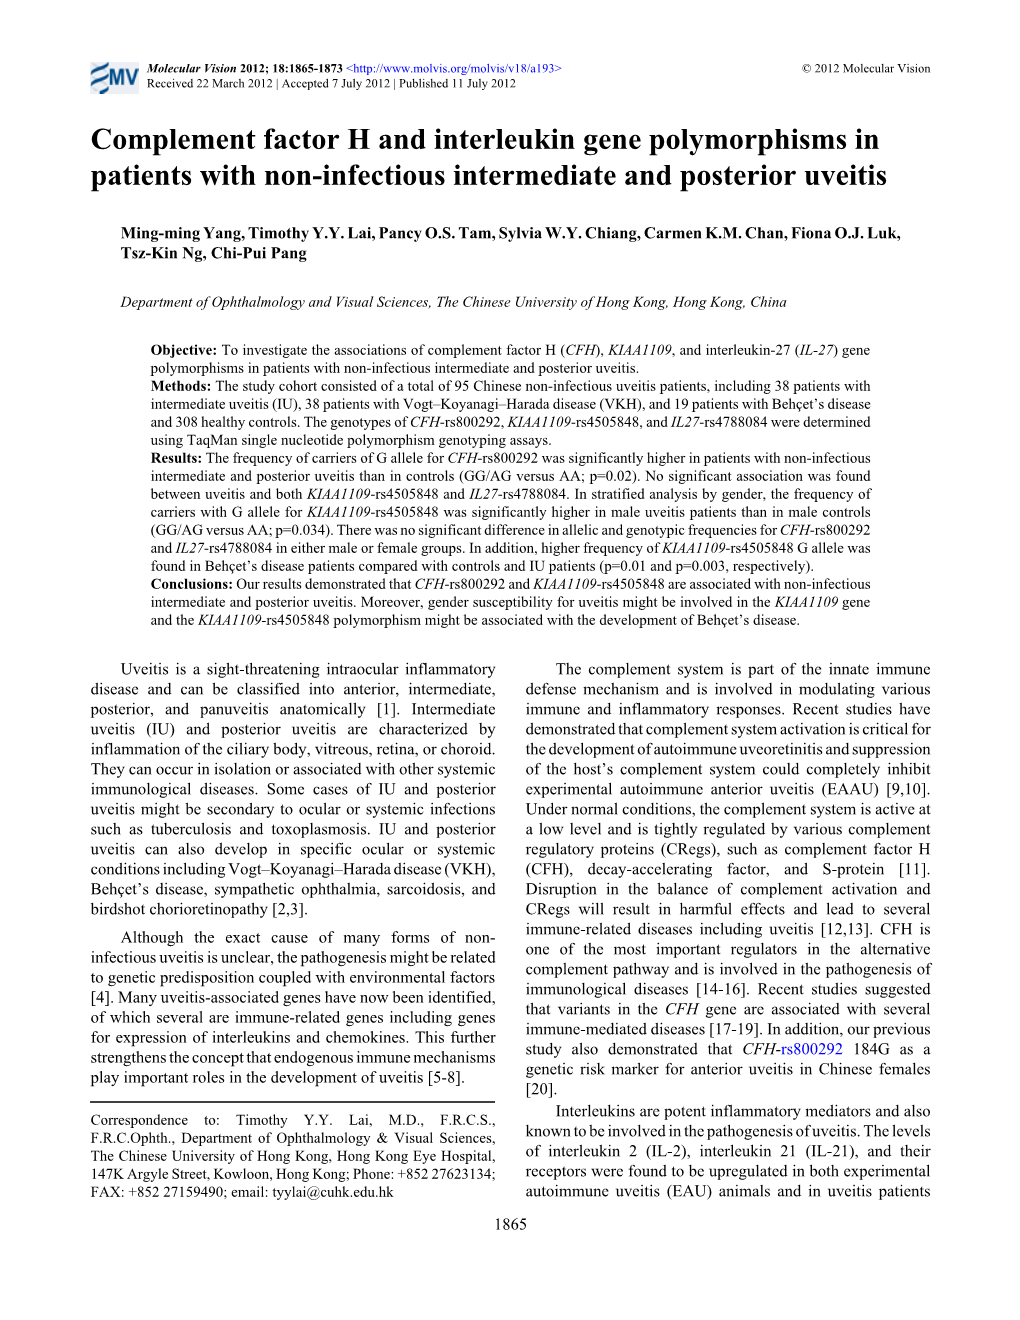 Complement Factor H and Interleukin Gene Polymorphisms in Patients with Non-Infectious Intermediate and Posterior Uveitis